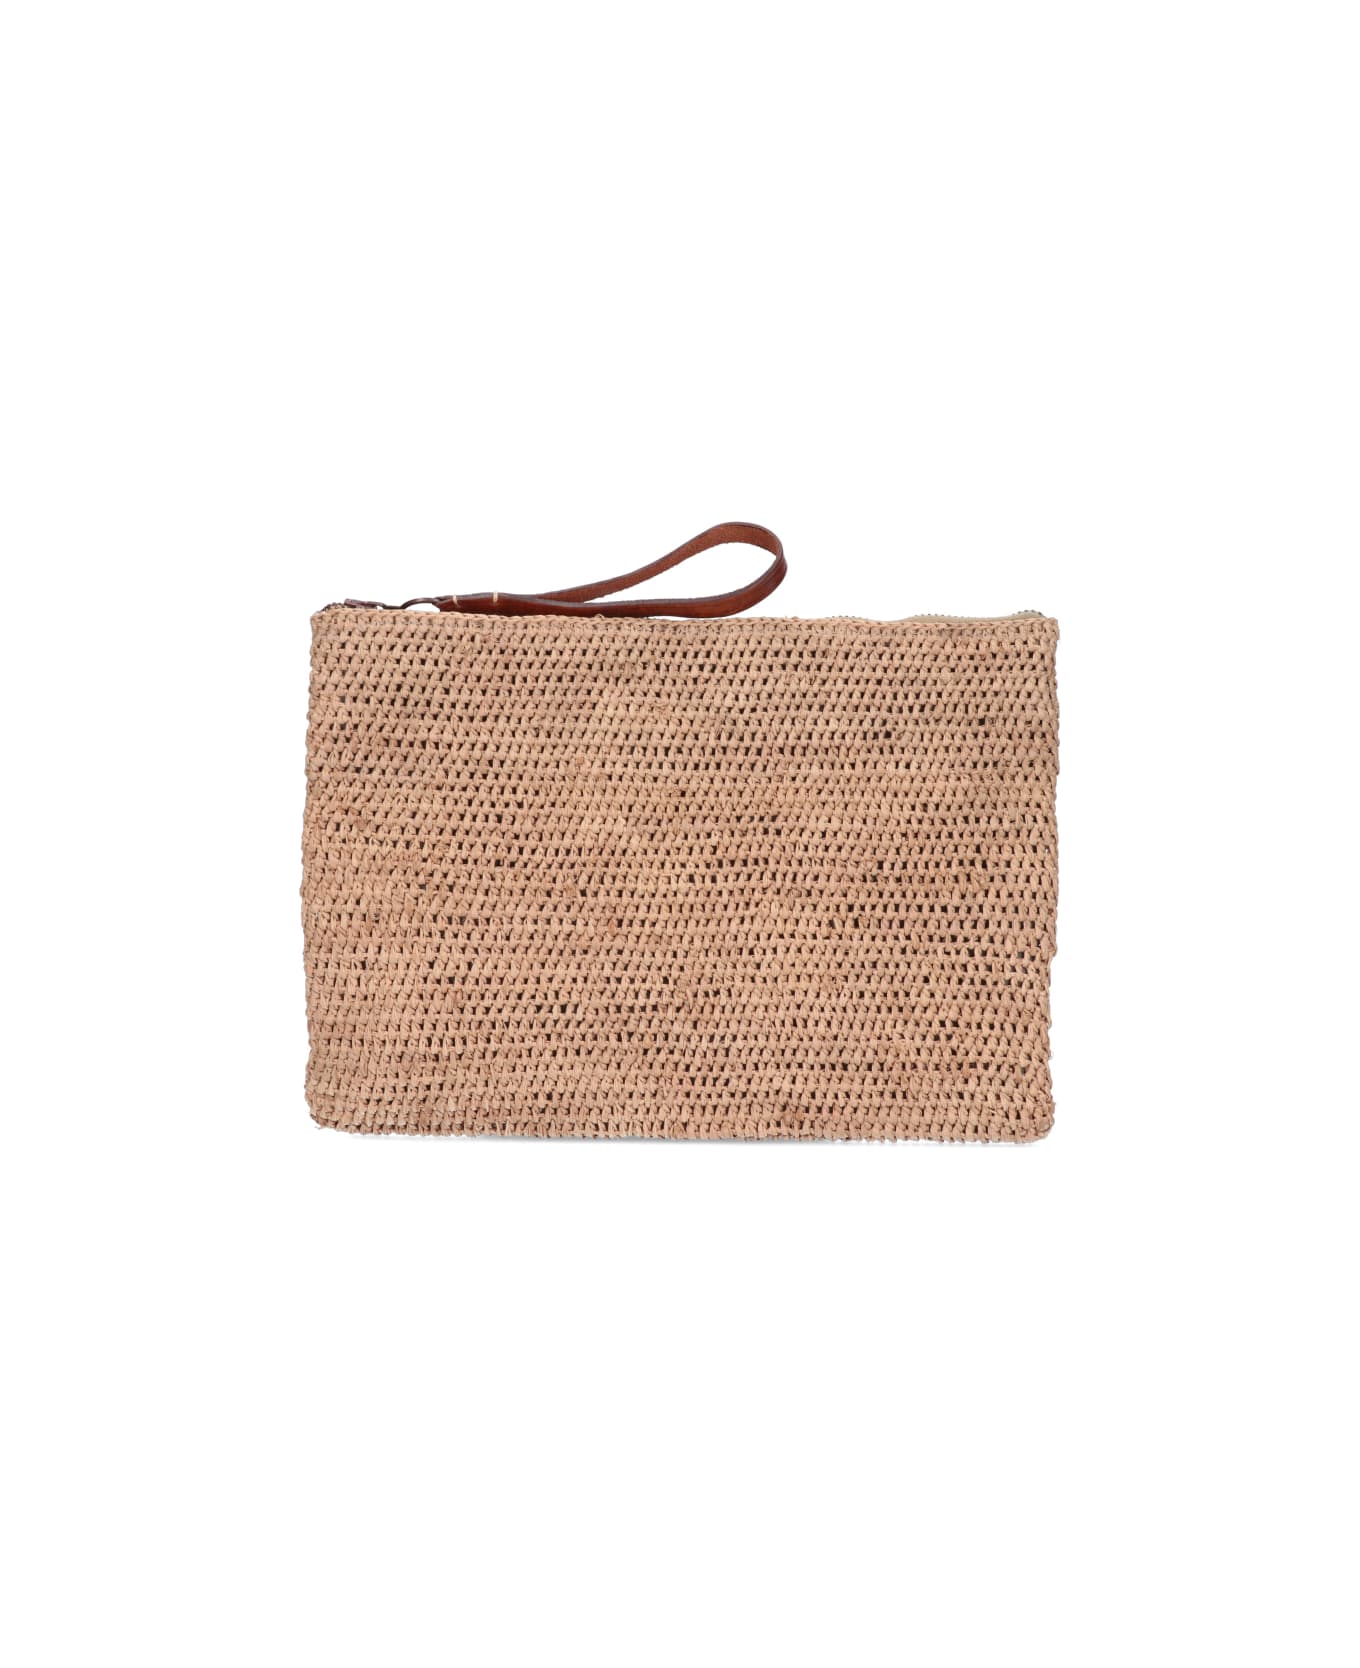 Ibeliv 'ampy' Pouch - Beige